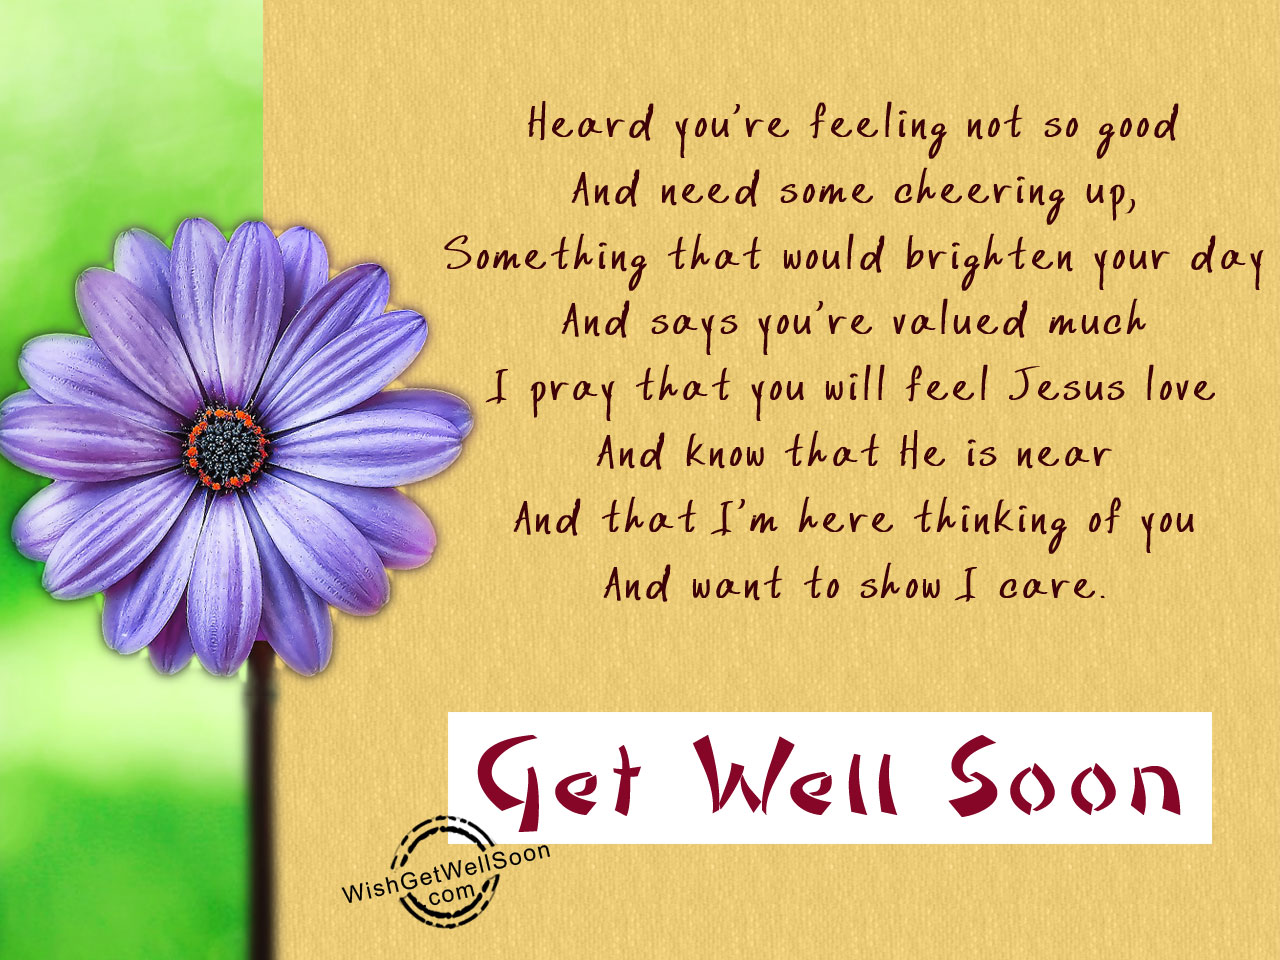 Get Well Soon Wishes For Christians Pictures, Images